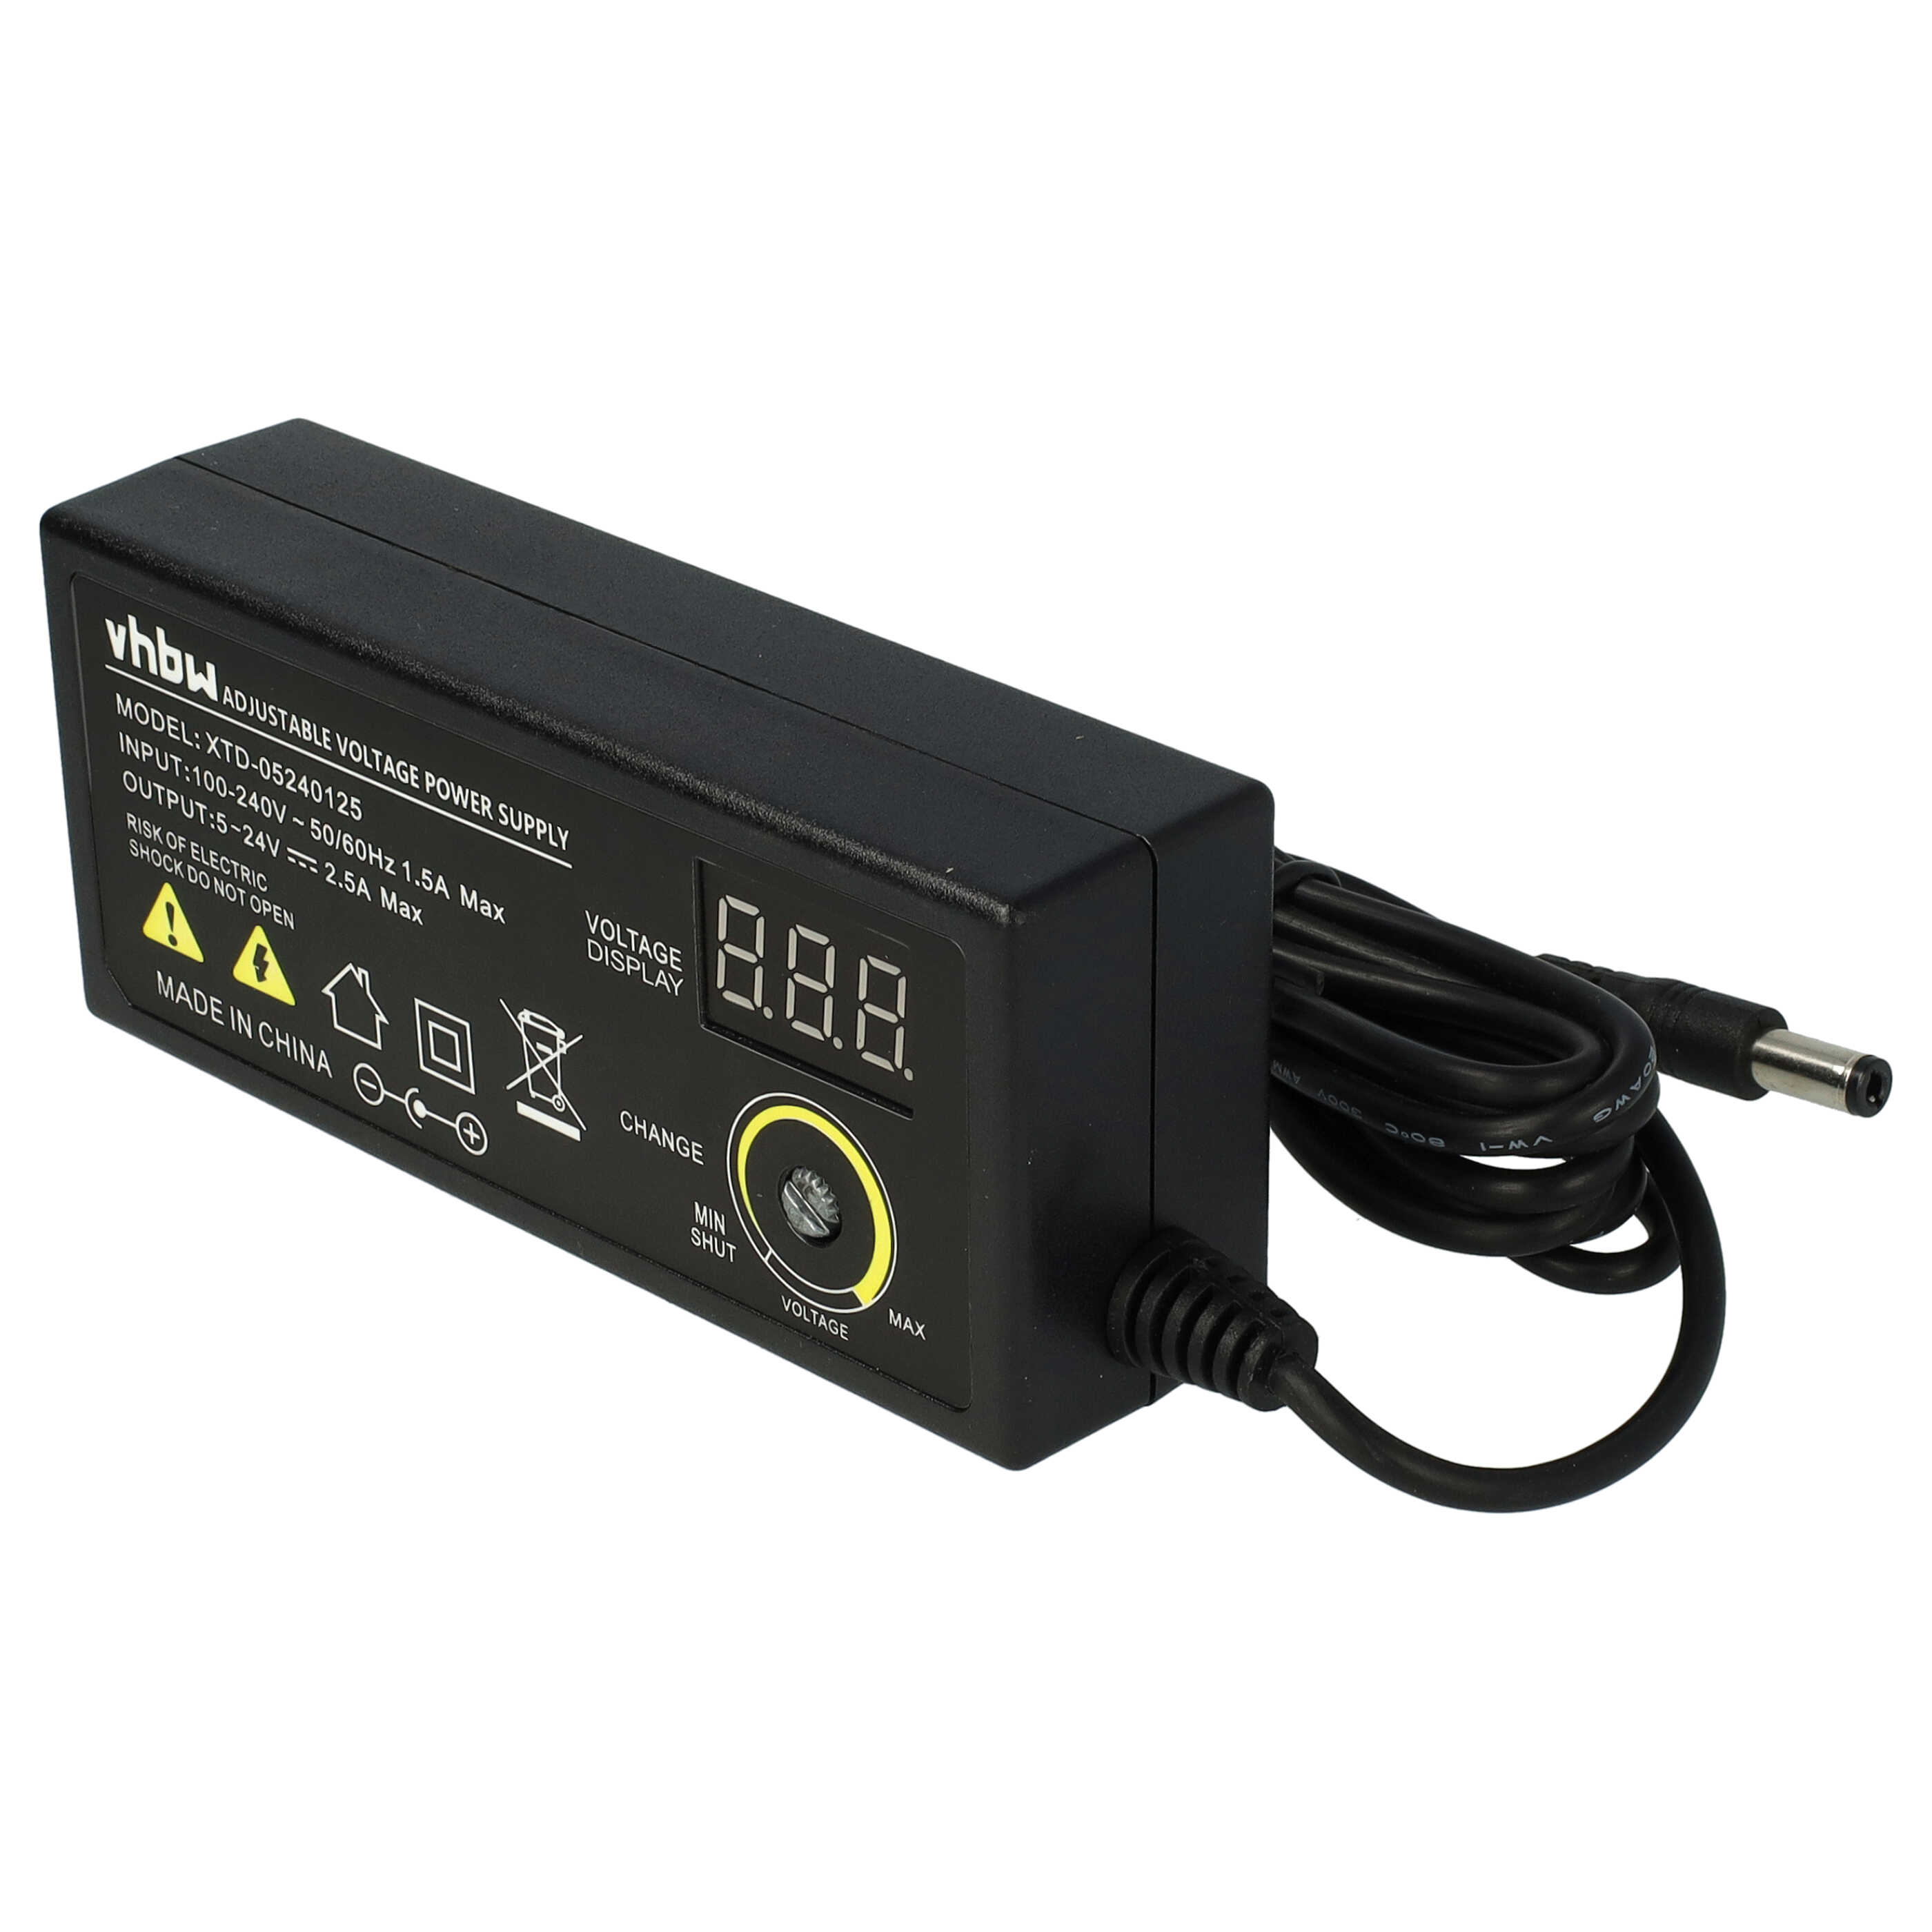 Mains Power Adapter with 10 Plugs suitable for various Electric Devices - 200 cm 5-24 V, 0.1-2.5 A